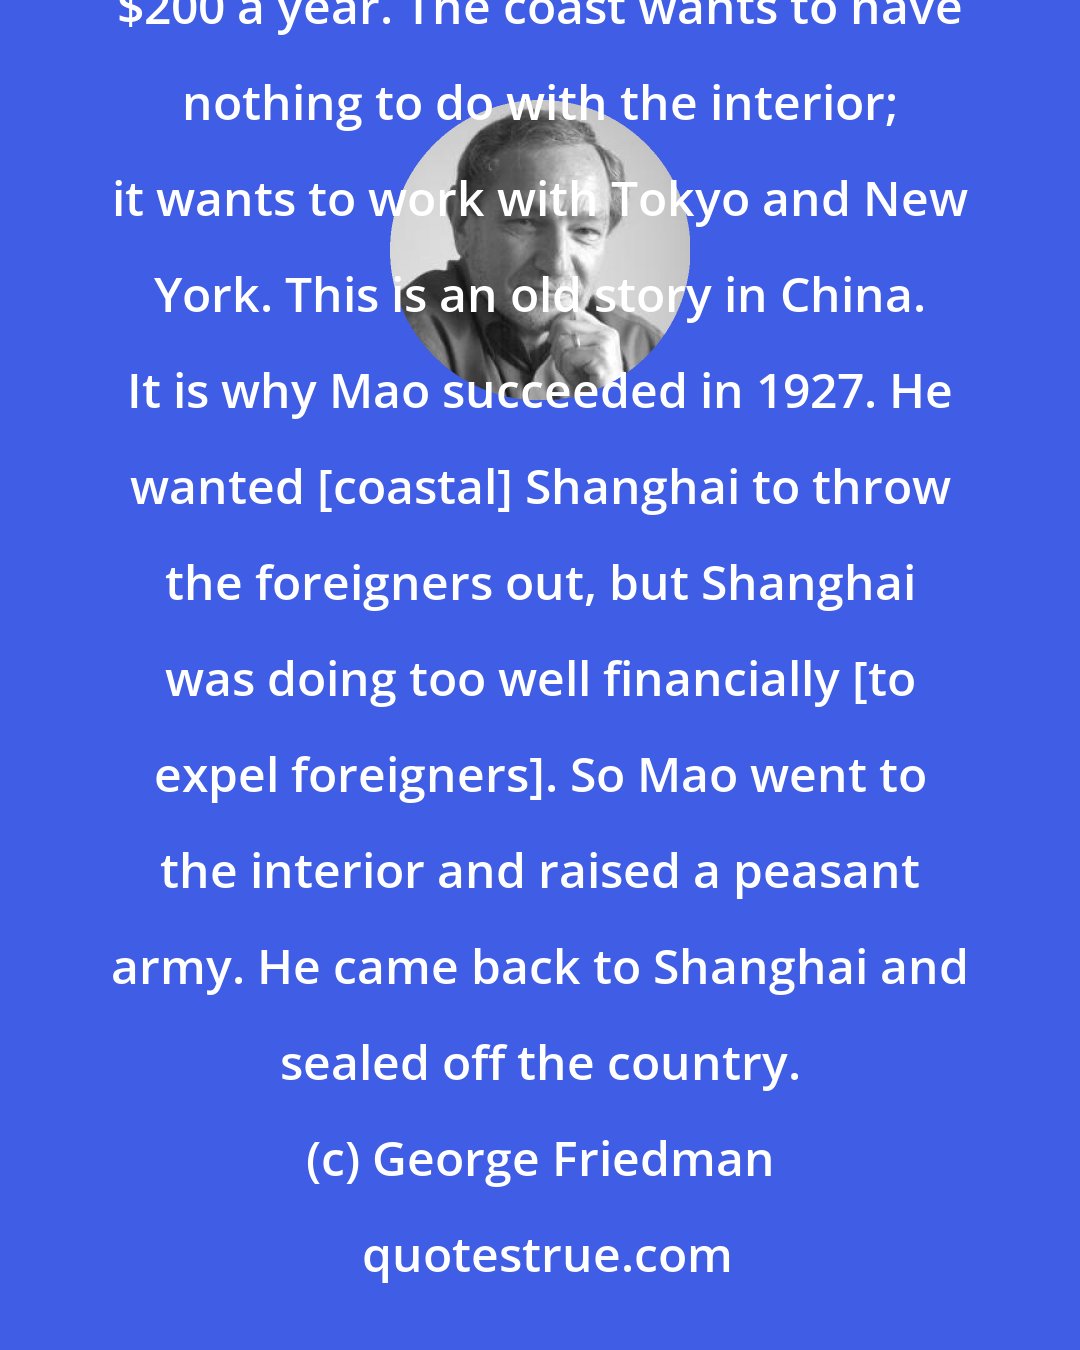 George Friedman: While certain coastal cities have become very prosperous, the rest of China has a per capita income of $200 a year. The coast wants to have nothing to do with the interior; it wants to work with Tokyo and New York. This is an old story in China. It is why Mao succeeded in 1927. He wanted [coastal] Shanghai to throw the foreigners out, but Shanghai was doing too well financially [to expel foreigners]. So Mao went to the interior and raised a peasant army. He came back to Shanghai and sealed off the country.